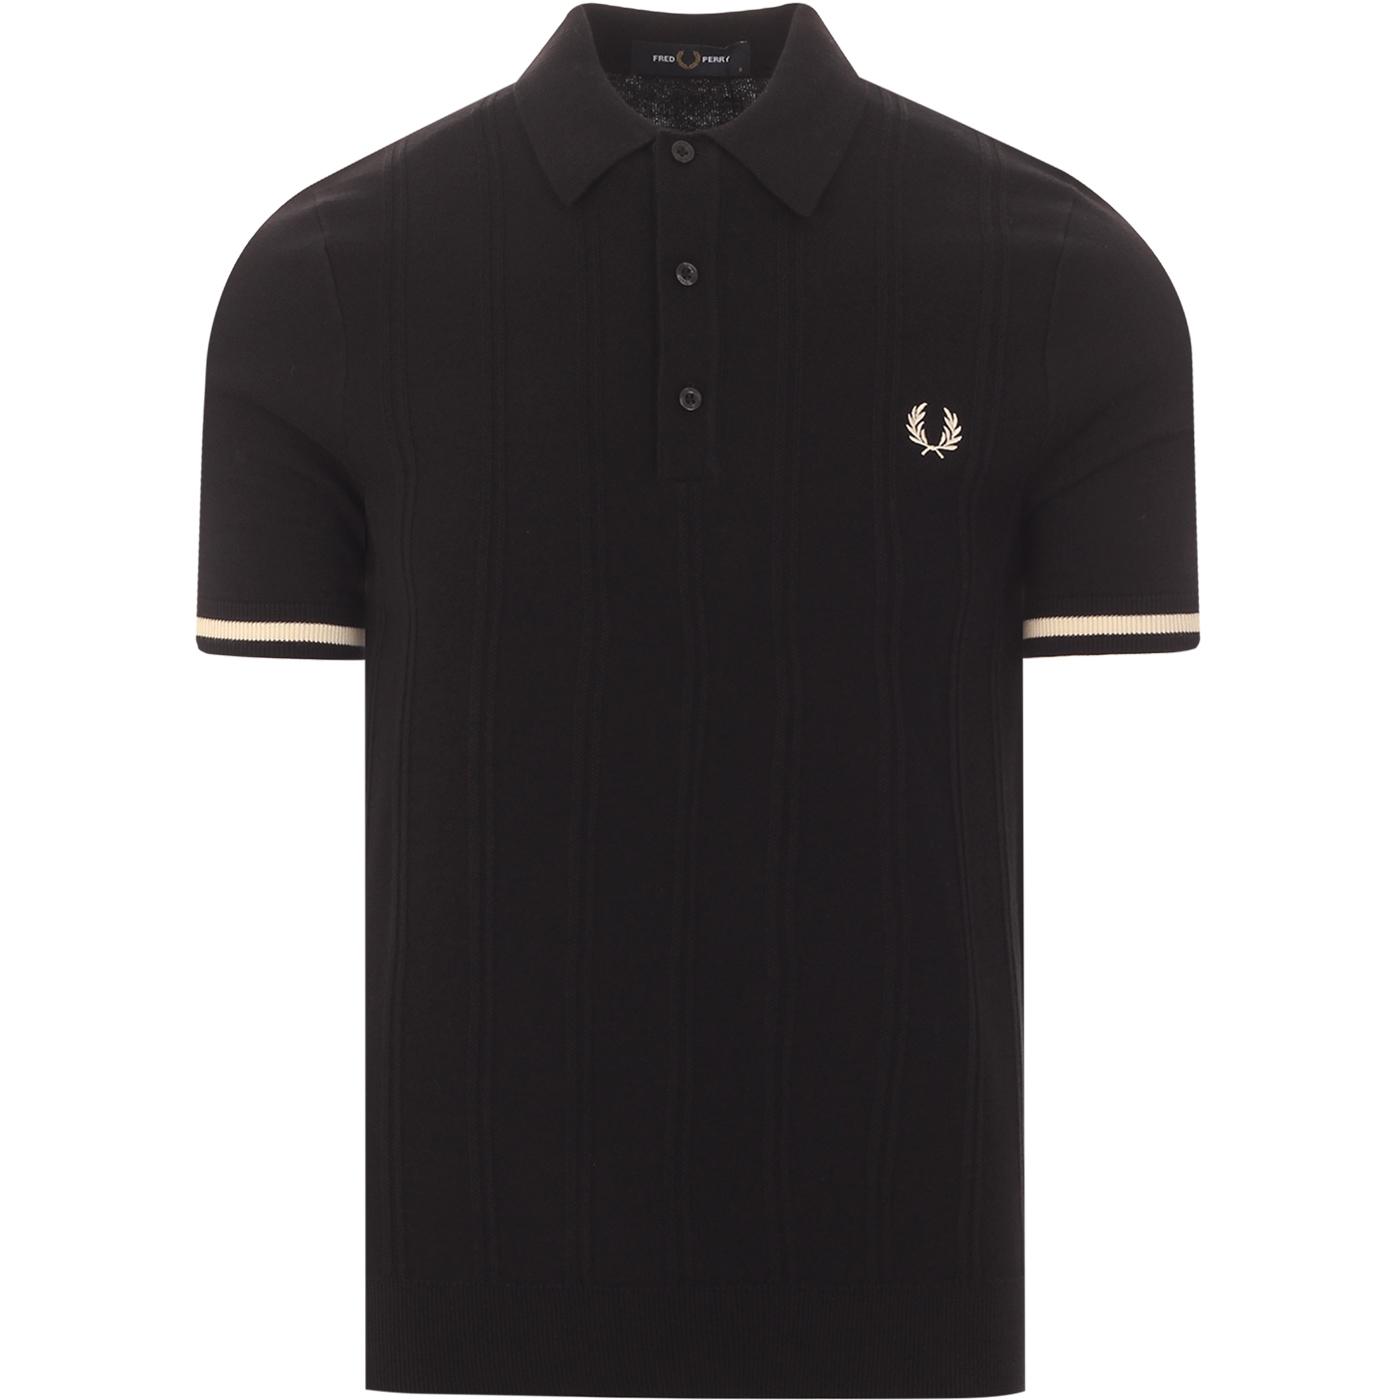 FRED PERRY Mod Tipped Texture Stripe Knitted Polo 